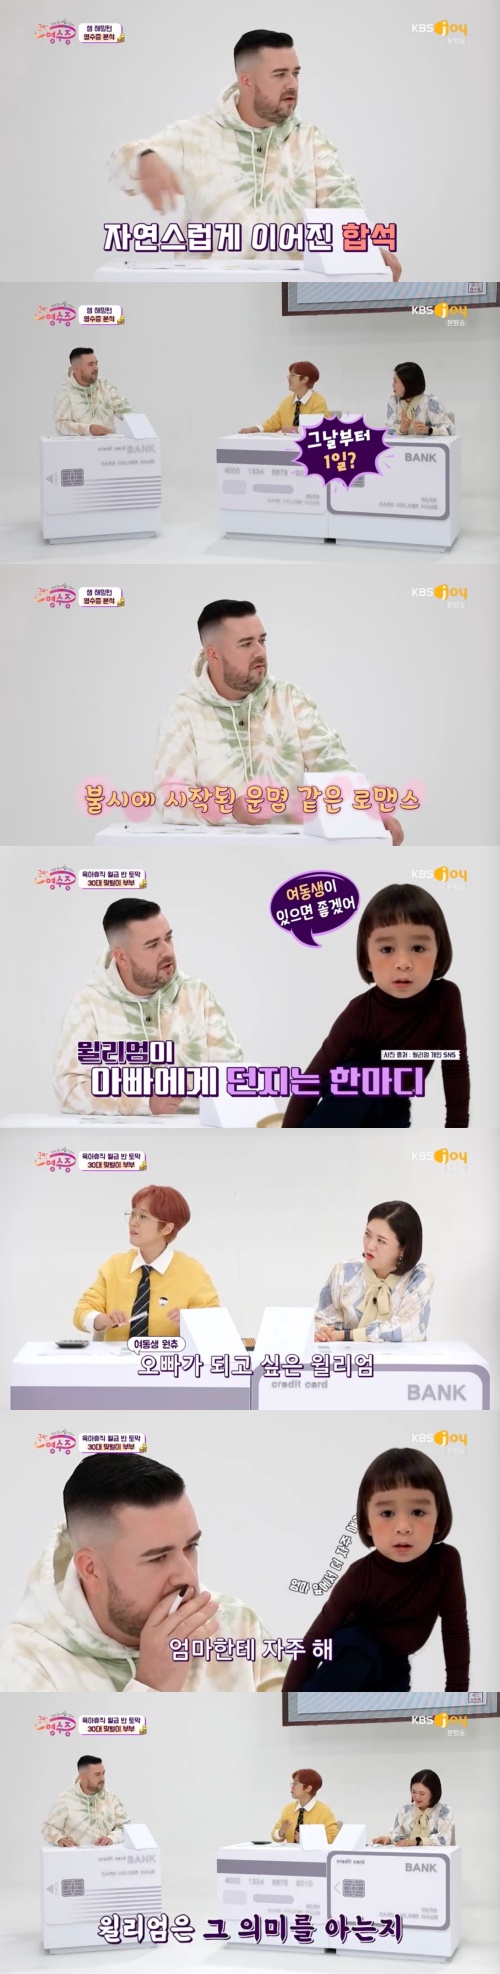 The comedian Young Jin Park won the 20 million won Lottery ticket, which Song Eun-yi Gifted.On the afternoon of the 12th, KBS Joy National Receipt depicted Song Eun-yi, Kim Sook, and Young Jin Park analyzing Sam Hammingtons Receipt.The peoples receipt Sam Hammington asked the secret of money management as a 9-year-old married couple, saying, All the money management is done by my wife. My wife does Korean money, and I do the India book related to the Netherlands.There is a little wealth in the Netherlands, he replied. There is no emergency money? And a smile.National Receipt Sam Hammington also revealed the percentage of incomes for himself and his two sons, William III of England, Bentley Motors Limited.Sam Hammington asked, Wheres the more profitable side? and said, Its about 6:4 - the kids are 6, Im 4.It seems to be changing when I take a lot of advertisements. He boasted of the Wilbenzers, which became an advertising blue chip.In particular, Sam Hammington said he was stunned about the cost of child support for William III of England, Bentley Motors Limited, and said: There is a lot of education costs going into it.Our kids are trying to learn from ice hockey to bikes and skateboards, coming to us and saying, I want to learn piano.I can not refuse because I have the money they earn. National Receipt Sam Hammingtons family name is I need to save more. Sam Hammington said, I dream of my home in Korea. Is it possible?, and Confessions said why he appeared on the National Receipt.So what is Sam Hammingtons Dream House? Sam Hammington said: Its a single house with Madang.When I live in Apartment, the most sorry thing for my children is to live with the word dont run all day long. I want to live without worrying about the noise between floors in the house where Madang is.Later, if you hand over the house to the children, you can divide it 5:5. Also, National Receipt Sam Hammington said, I ask you every time I go out on the air. I hope you dont talk about the Netherlands.Netherlands have no idea whats going on now, I dont deserve to speak, he added, making the scene furious.National Receipt Song Eun-yi, Kim Sook, and Young Jin Park are analyzing Sam Hammingtons Receipt, and they are also interested in the fact that collecting sports cards is a hobby.Sam Hammington said: Its a variety of movies, animations and more; it was first purchased when I was a kid in the 1990s.I started to collect it again after my acquaintance, he said. Does the price of sports cards go up like stocks? Michael Jordans sign card is billions of units.Nowadays, the players also come and go in a billion units. Sam Hammington later boasted that he had acquired a Kyler head card, saying: My grandmother is Korean, a very good friend in the football world, a card with only 25 cards in World.If a more famous player came out, he might have cried, but the future value is unpredictable because it contains the sign. In addition, Sam Hammington released 35 cards and 20 cards in World, or released a sports card with Blood Diamond, which made the house theater shake.Sam Hammington said of the Blood Diamond card price, Recently, it is from 3 million won to 10 million won.National Receipt Sam Hammington also confessed his shoe-gathering hobby with sports cards; Sam Hammington said: Im interested in shoes, I think Ive spent the most money so far.I collected up to 100 pairs when I had a lot of time, he said. I often wear it in front of me to get out quickly because I move with my children. National Receipt Sam Hammington recalled the first moment he met his wife, who said: I met while drinking in Itaewon.At the next table, my wife asked me Where did you come from to English language and I said fit it in Korean.After that, I joined naturally and I started dating next time. In particular, Sam Hammington said, There is a romance for my daughter, and William III of England sometimes comes and says, I wish I had a sister.So, in a whisper to William III of England, he said, Telling my dad doesnt work, do it often to my mom.William III of England then told his mother that he wanted to have a sister. In the meantime, Young Jin Park scratched a Gifted Lottery ticket by Song Eun-yi in the Money Debate of the National Receipt and said, I think its me., and devastated the studio; in fact, Young Jin Park was surprised to see the lucky number 1 while scratching the Lottery ticket for 20 million won.Young Jin Park said, Friend answered 50% to the question How much should I divide into percentage if Lottery ticket is won?So Song Eun-yi said, I have to give me 10 million won, I promise. Kim Sook said, Lets share it.Young Jin Park, a national reciprocal, also sent a video letter to his wife, saying, Prepare for the open run.But this was a secret camera prepared by Song Eun-yi.Song Eun-yi said, It was a National Receipt squid game that can see your psychology and bottom so far. Kim Sook said, Is it real fake?I will donate when I win, Young Jin Park said.In addition, Young Jin Park said, The back is a little crude, and looked at the Lottery ticket and said, I was really surprised when I won.I thought it was heartbreaking, she told the behind-the-scenes story.Finally, Young Jin Park said, What was your feelings when you told Song Eun-yi that you had to give him 10 million won? He replied, Of course I should give it to you.On the other hand, KBS Joy National Receipt is an Indian entertainment program that provides analysis and customized solutions to the representative of the entertainment industry and the Indian Advisory Committee by receiving the clients Receipt.KBS Joy National Receipt